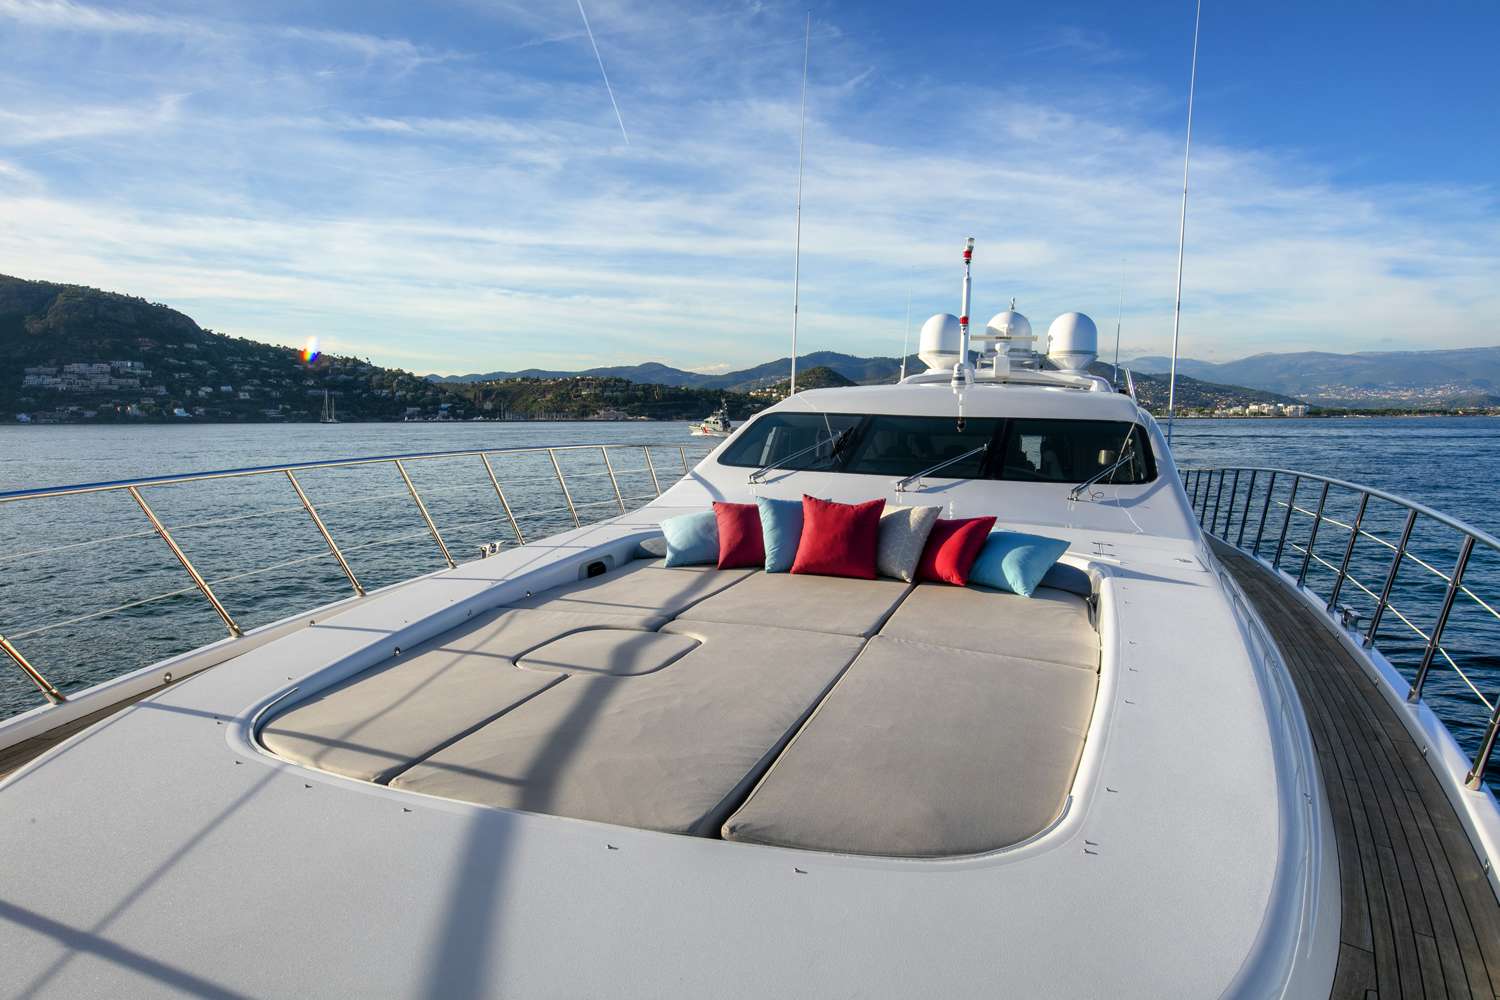 Bo - Yacht Charter Cannes & Boat hire in Fr. Riviera, Corsica & Sardinia 4